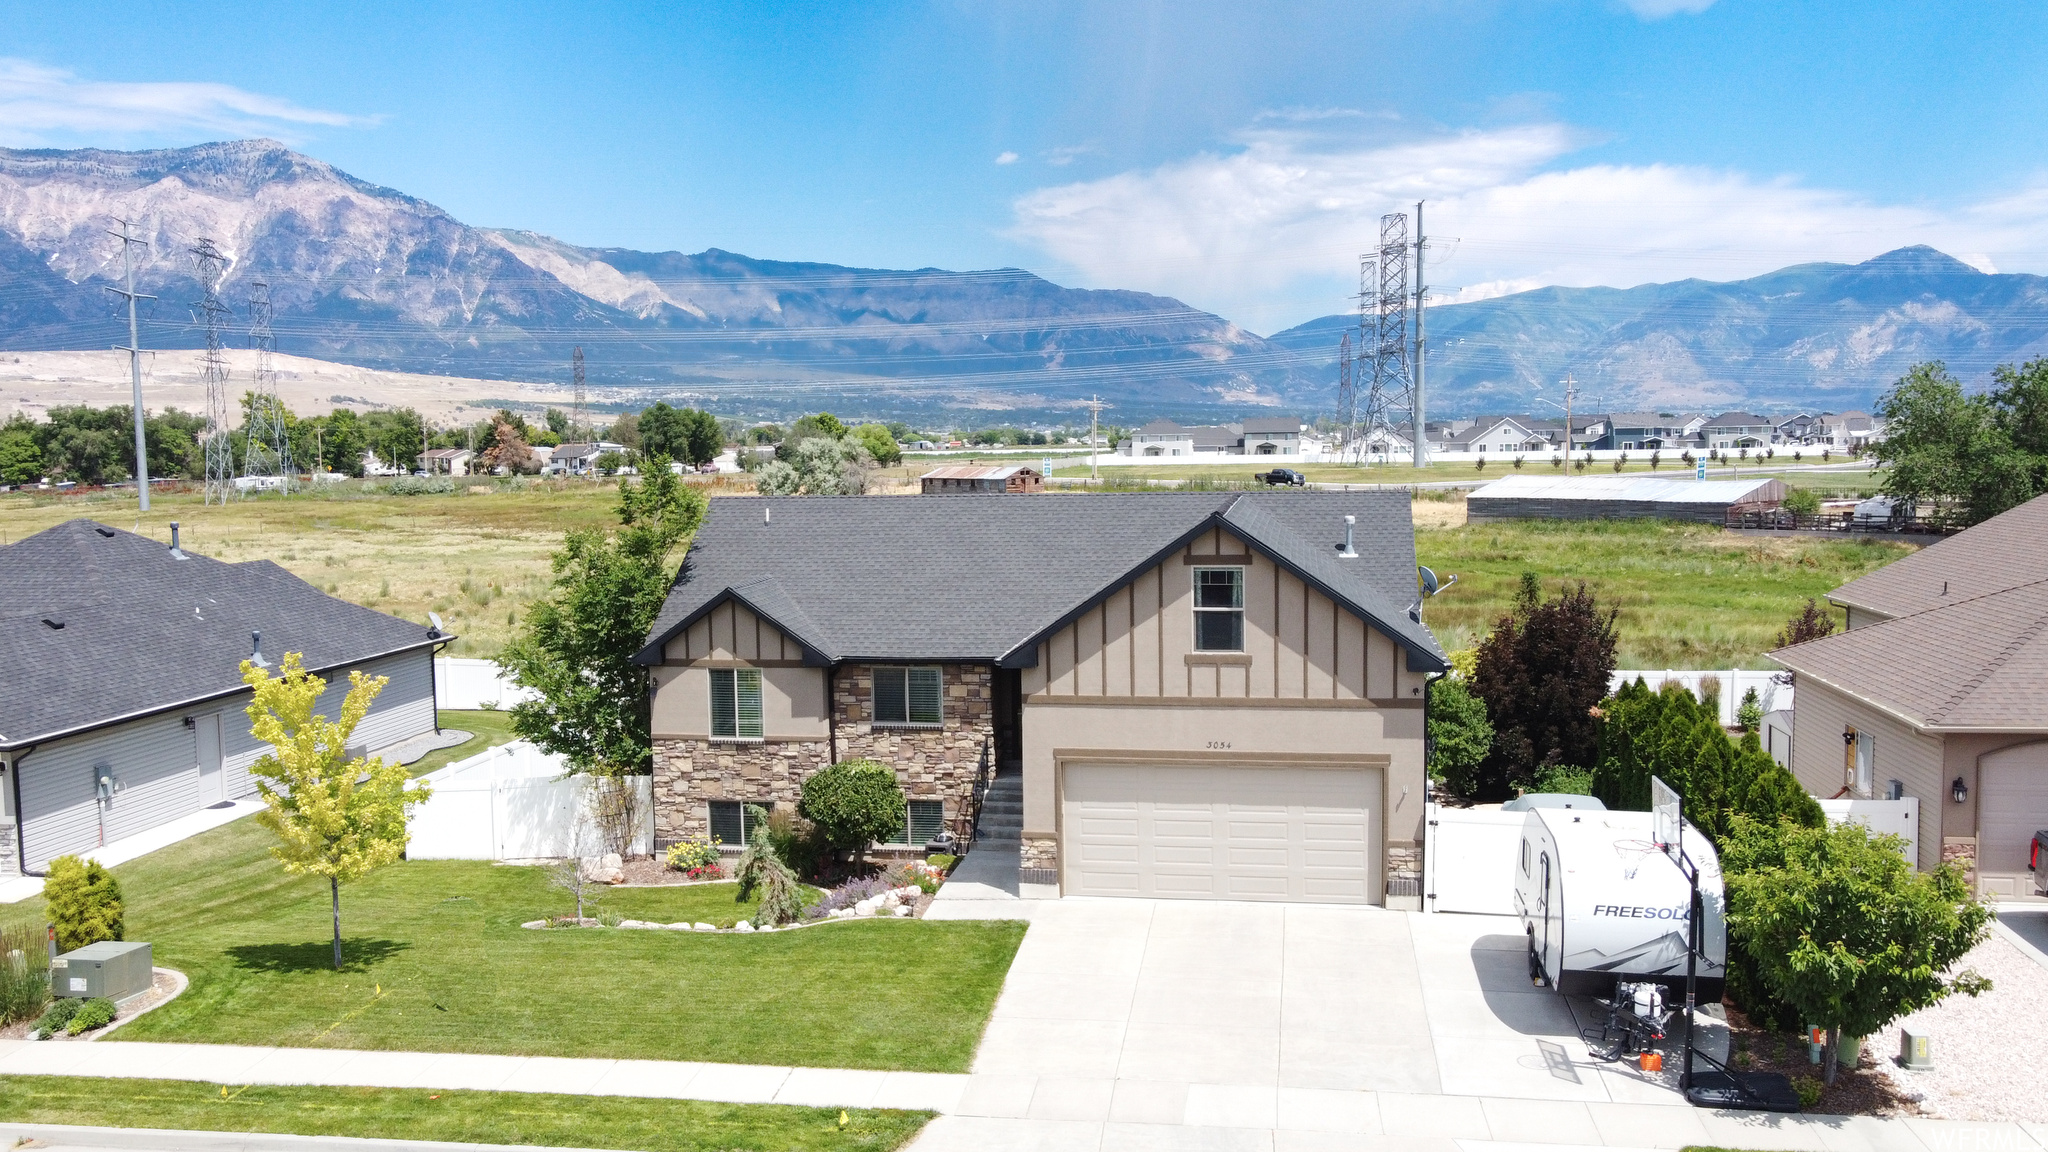 unobstructed views of the Wasatch Mountains!